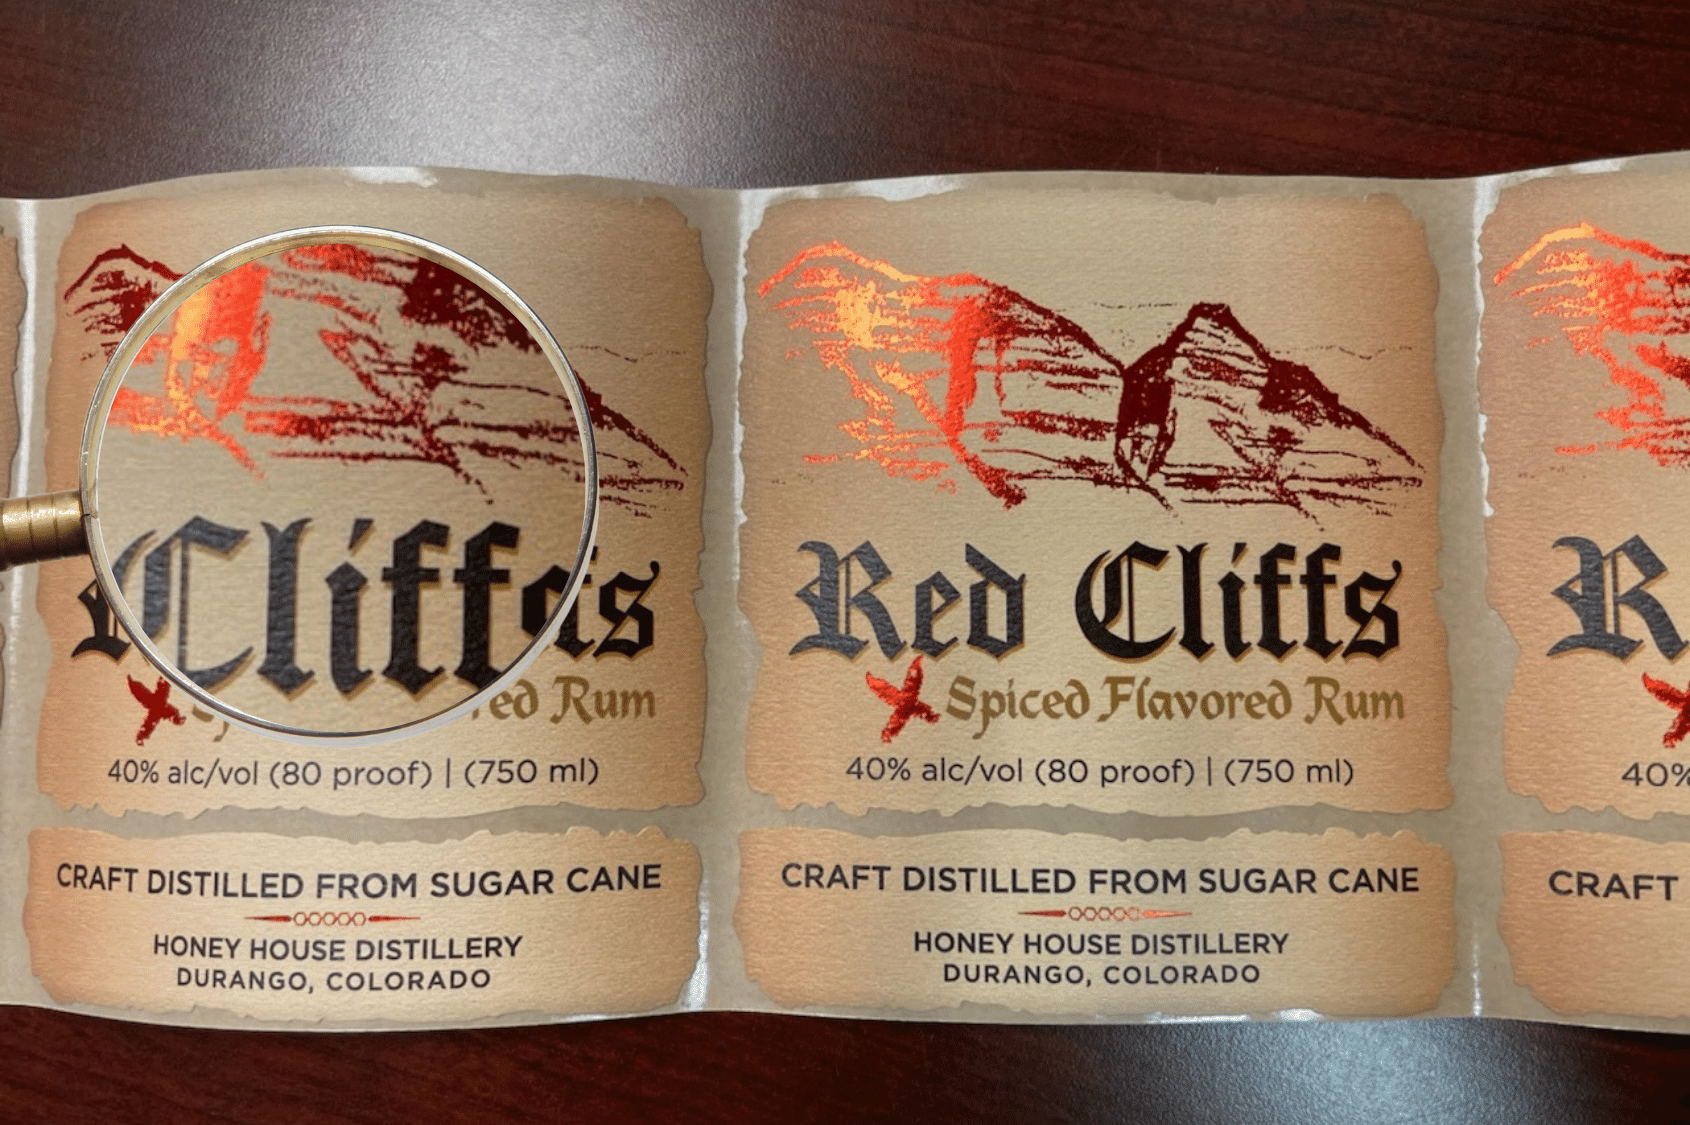 Red Cliffs Spiced Rum vintage textured wine stock labels under magnifying glass.